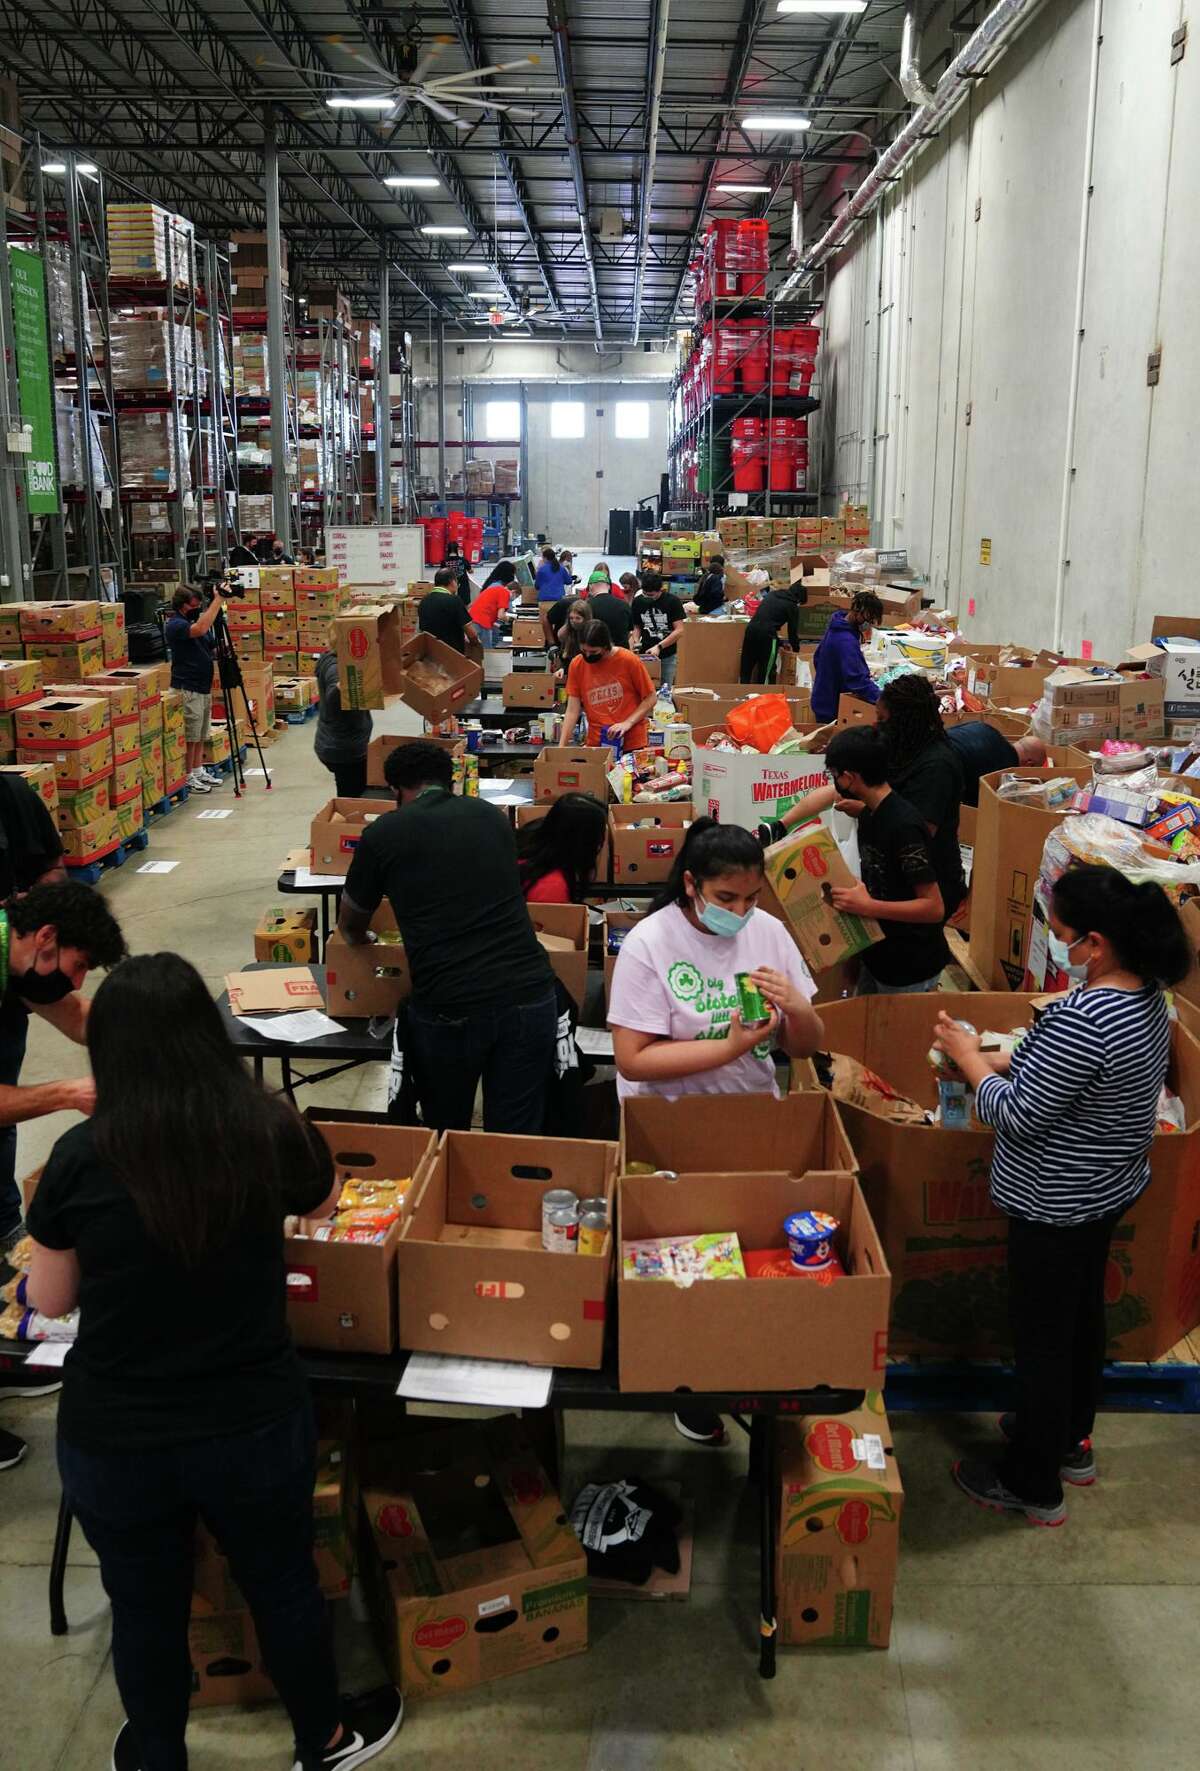 People sort items during a volunteer event Wednesday at the San Antonio Food Bank prior to the Alamo Bowl between Oklahoma and Oregon.